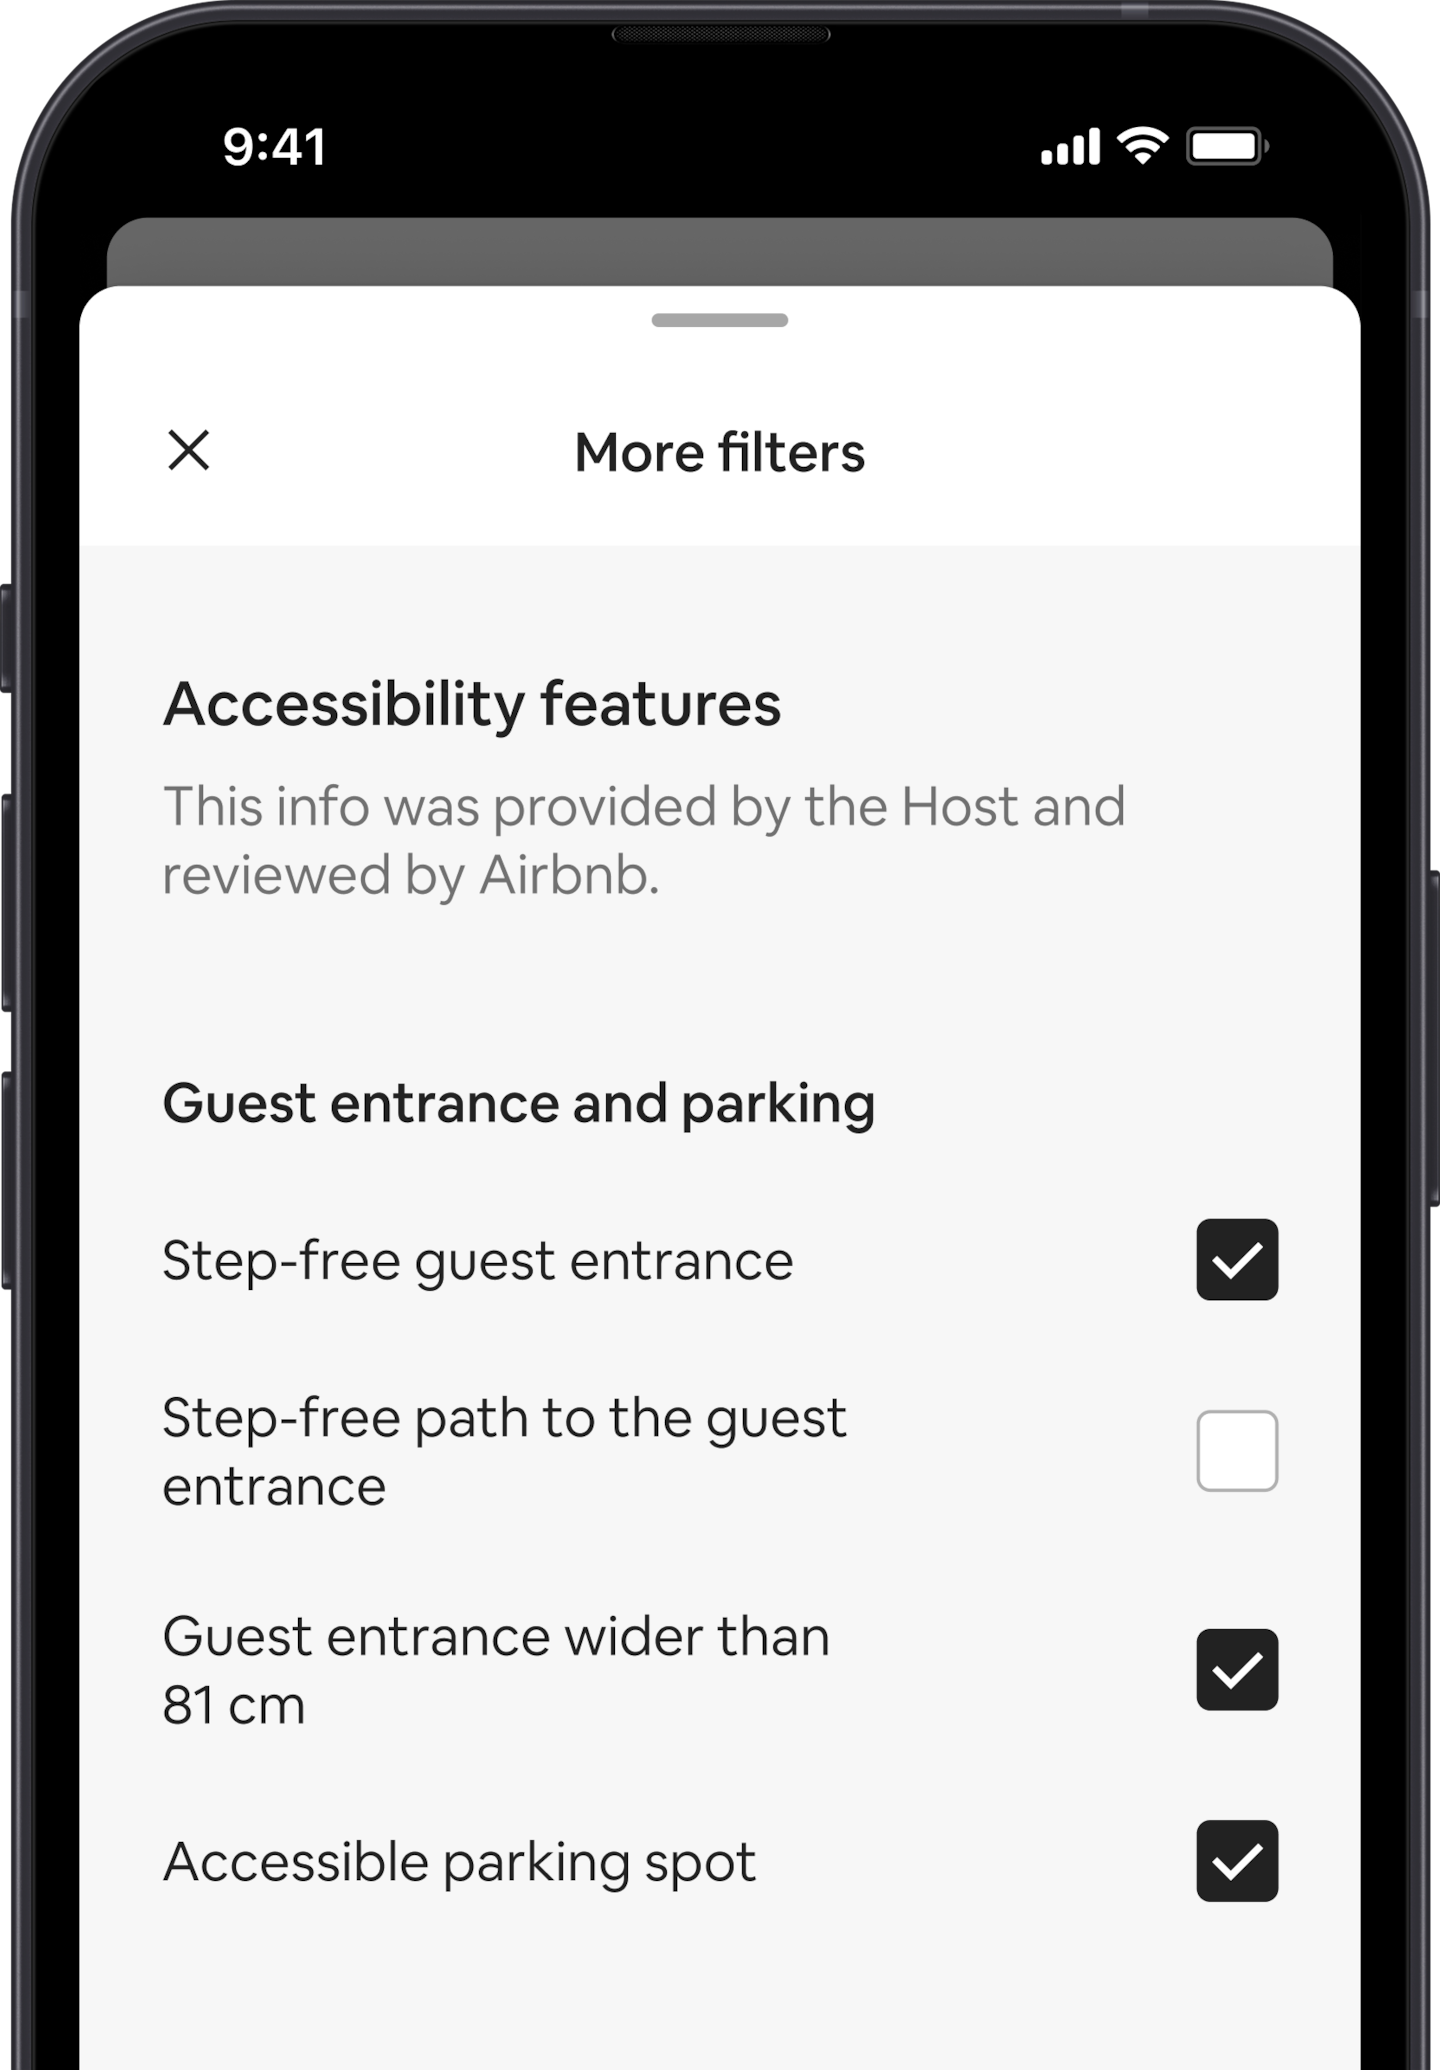 A mobile phone displays the More filters overlay, which is one of many search filters. There is a section heading that reads 'Accessibility Features'. Below that accessibility features are grouped by areas like 'Guest entrance and parking.' There are checkboxes where you can select as many features as you want.